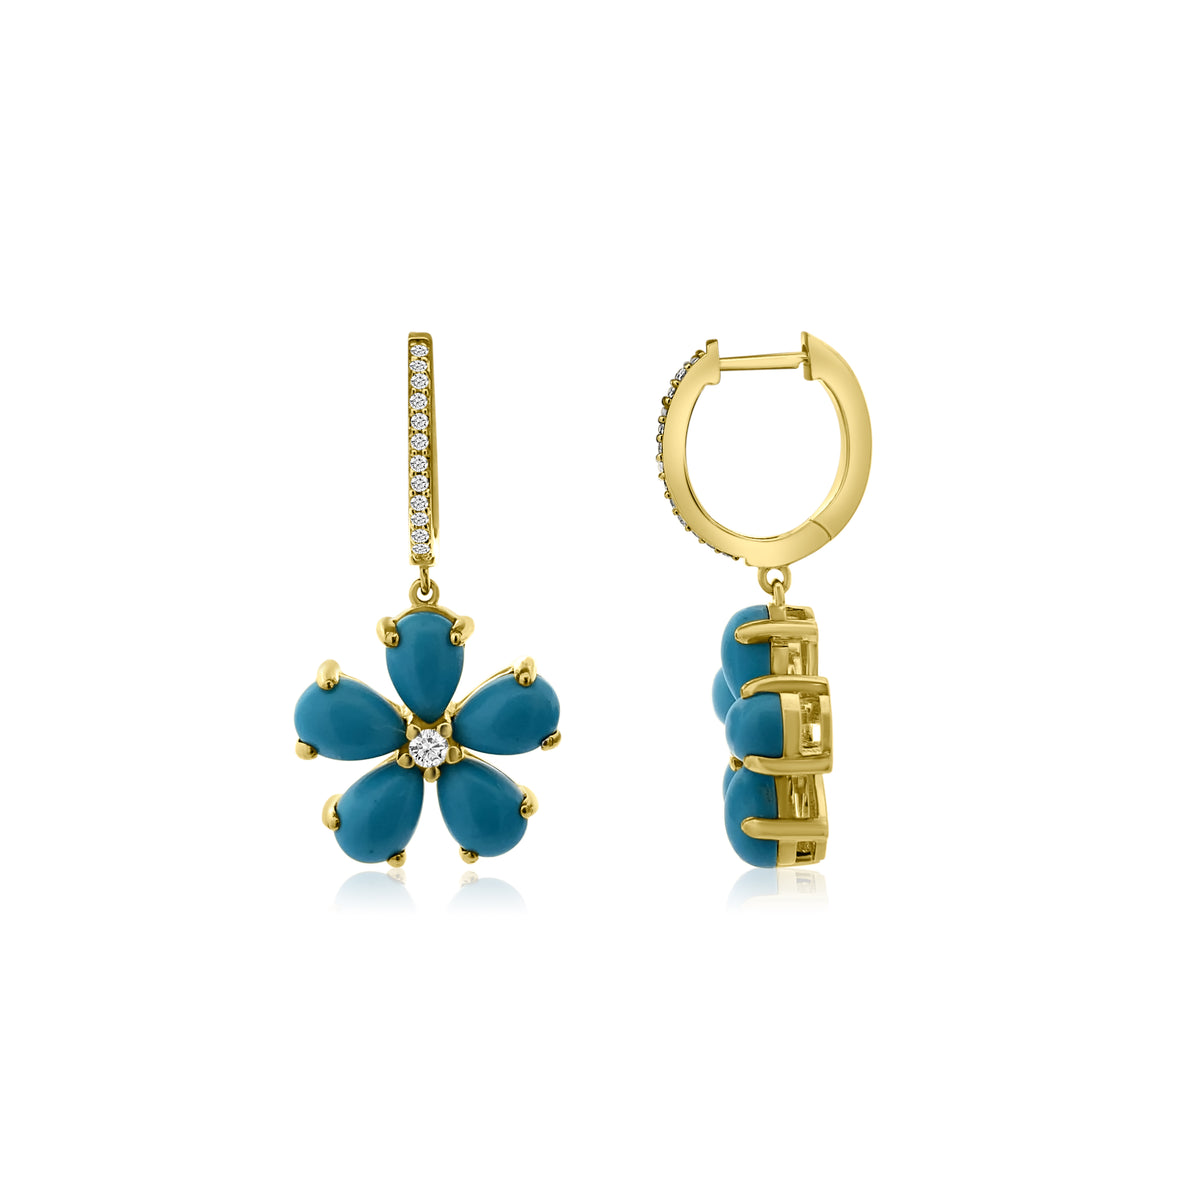 14k Yellow Gold Fiore Earrings - Turquoise